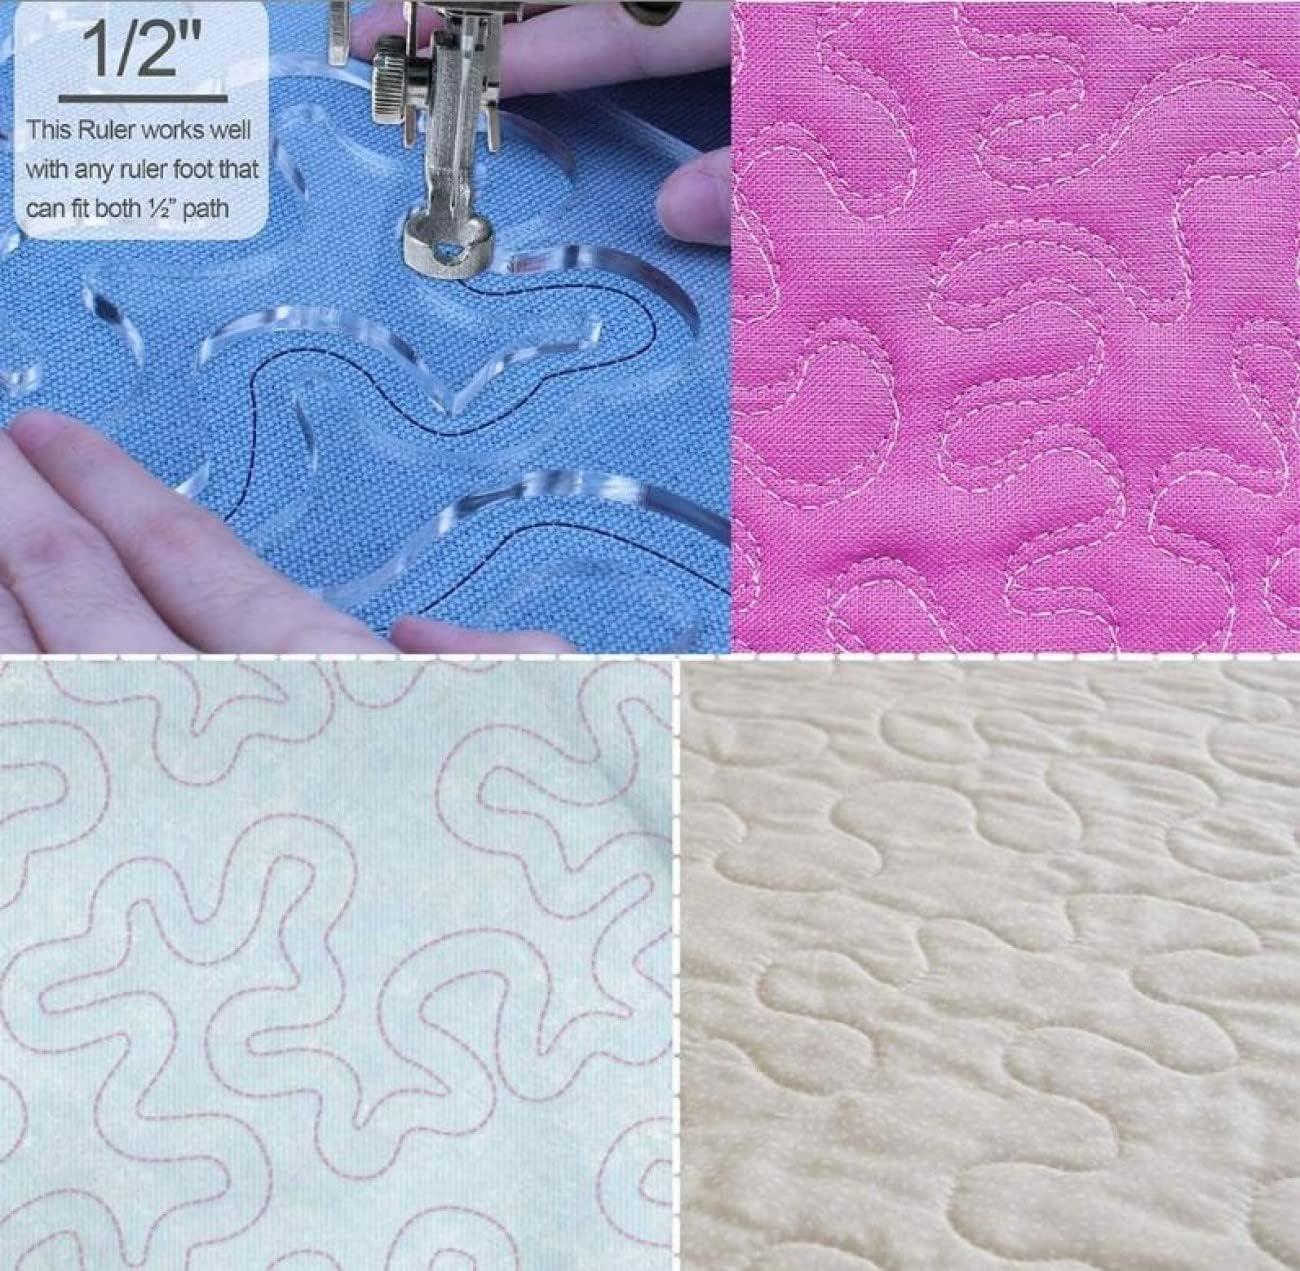 Free motion quilting foot - elna canada